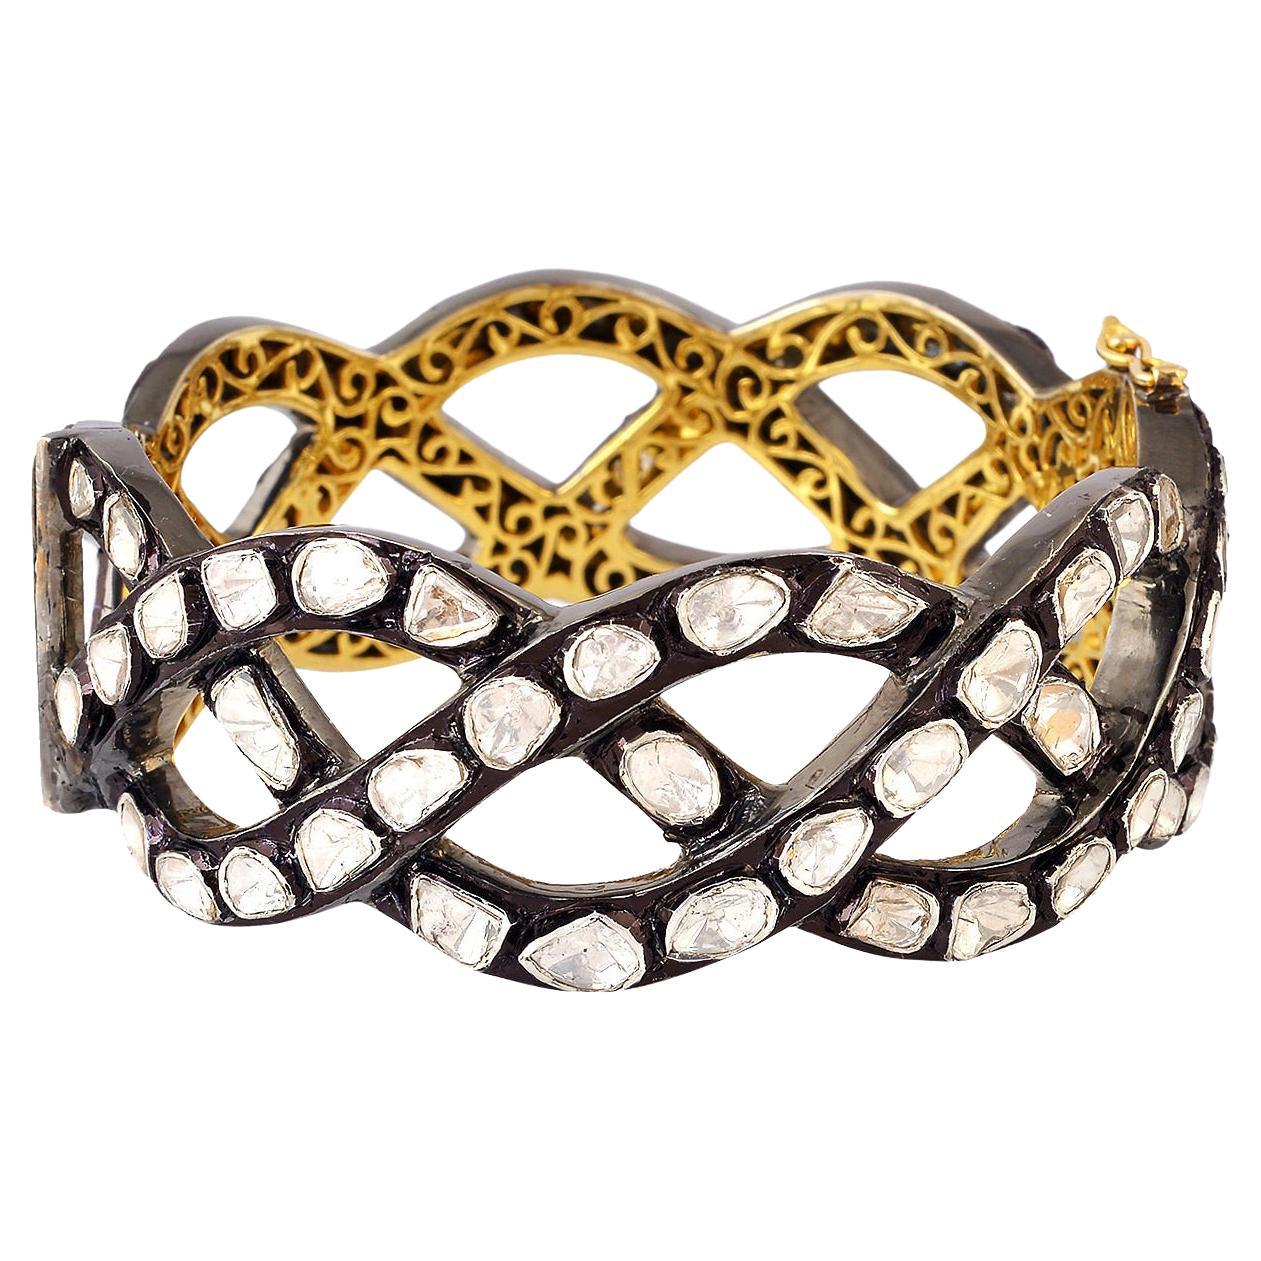 Rose Cut Polki Diamonds Link Chain Bracelet Made In 18k Yellow Gold & Silver For Sale